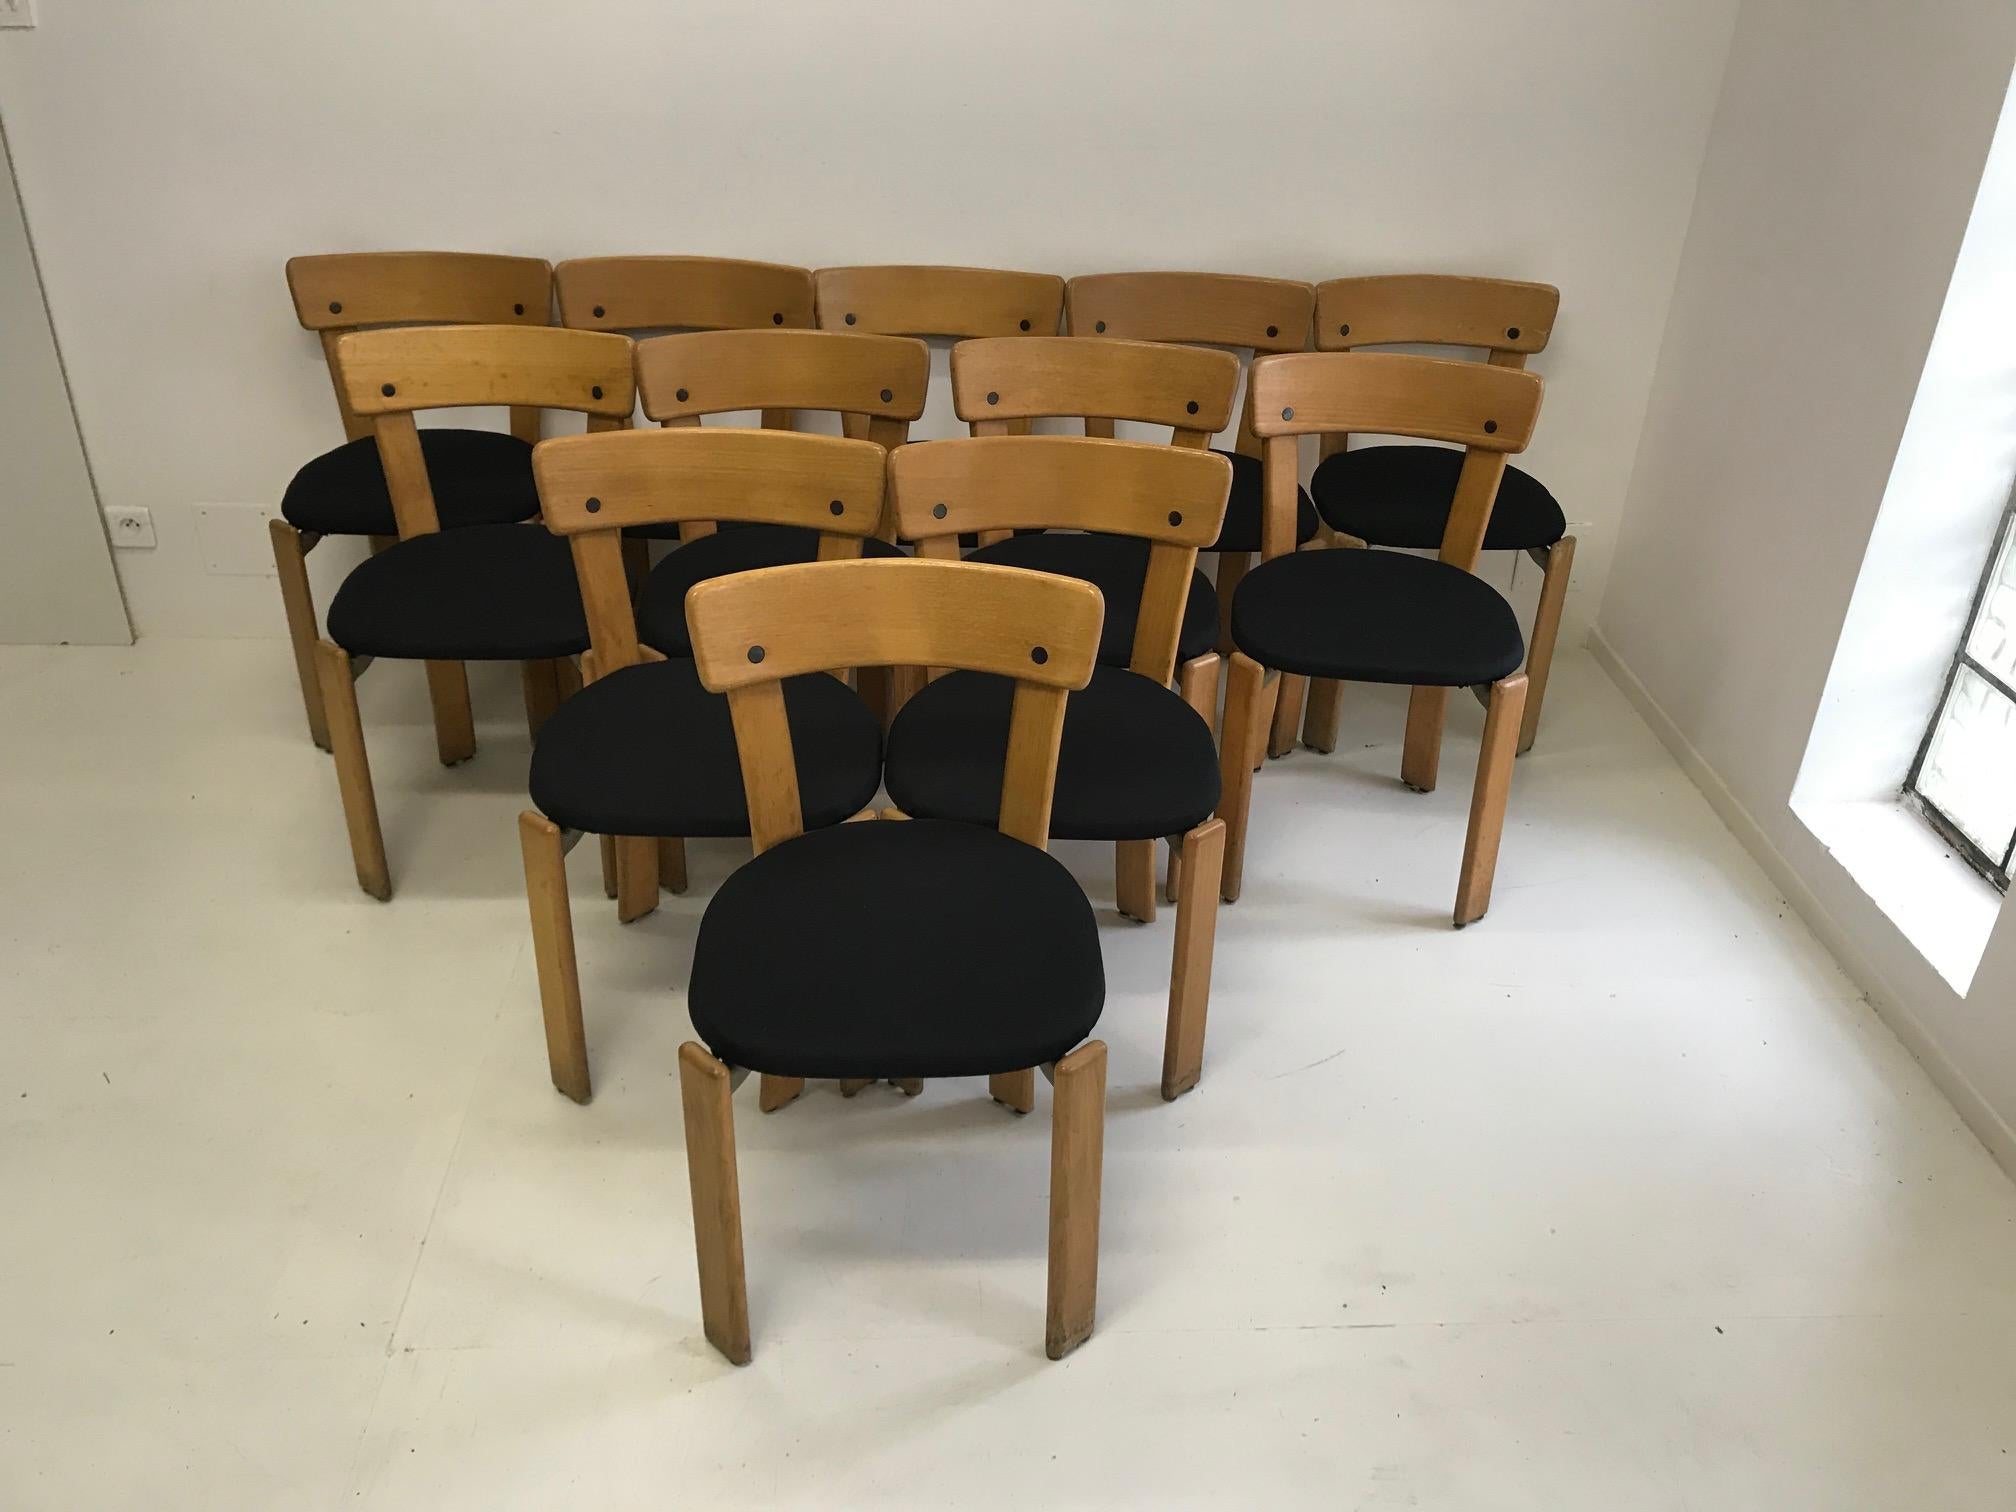 The set of twelve dining chairs was designed by Bruno Rey Switzerland in the 1970s and executed by Dietiker. The dining chairs were made of solid beech and cast aluminum. The seats are newly padded and covered with black textile fabric.